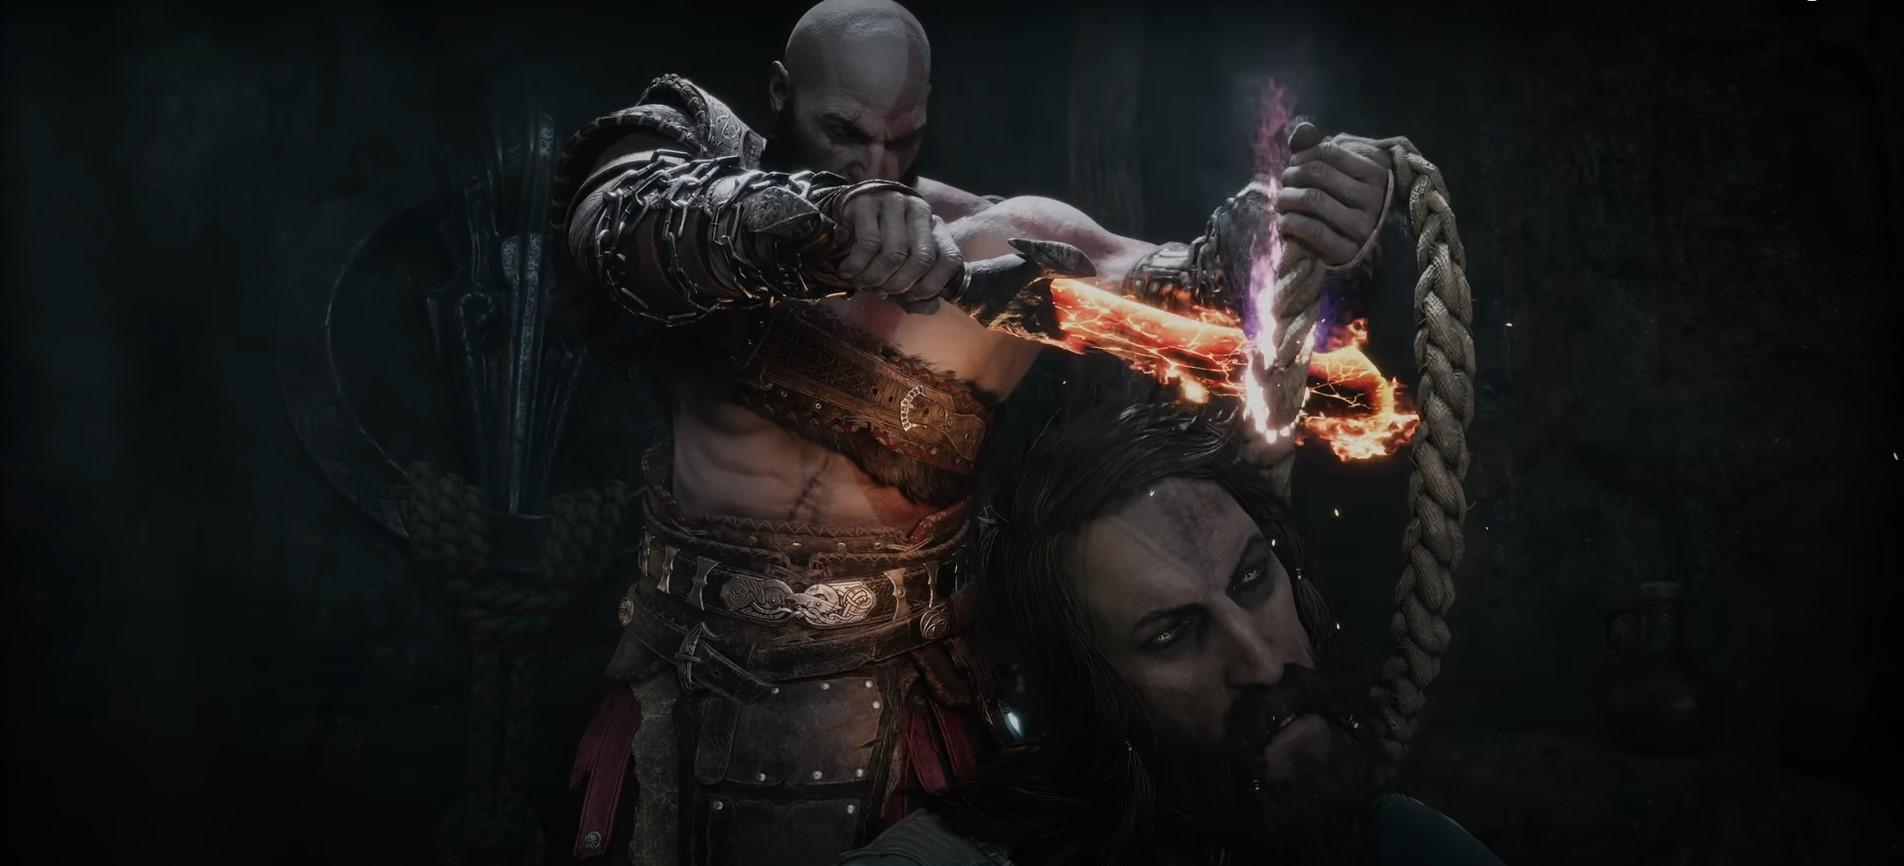 God of War Ragnarök New Game Plus is available now – PlayStation.Blog